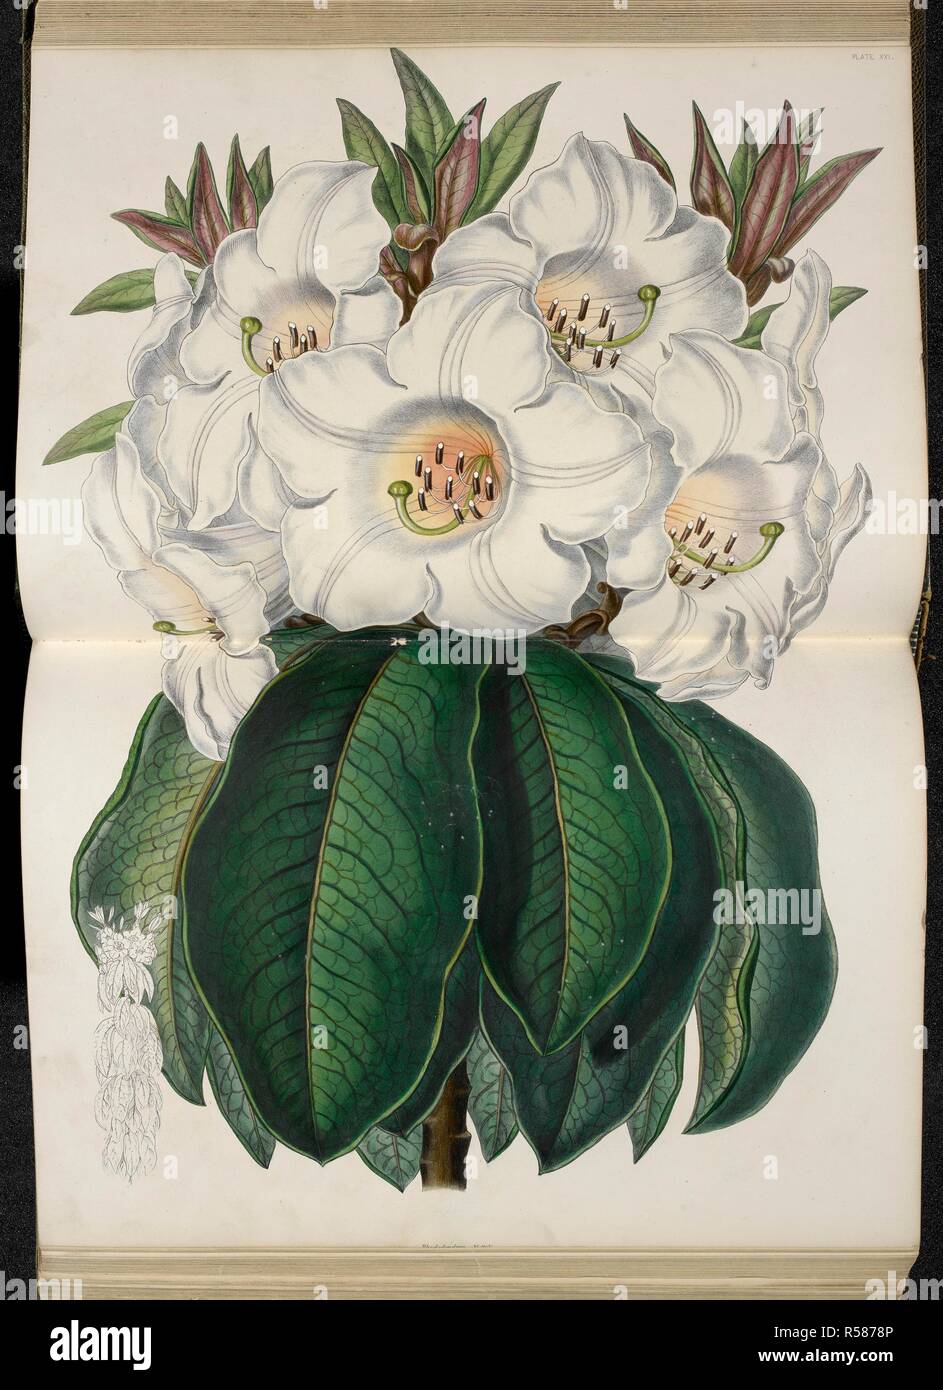 Rhododendron nuttallii (Booth). The Illustrated Bouquet, consisting of figures, with descriptions of new flowers. London, 1857-64. Source: 1823.c.13 plate 21. Author: Henderson, Edward George. Stock Photo